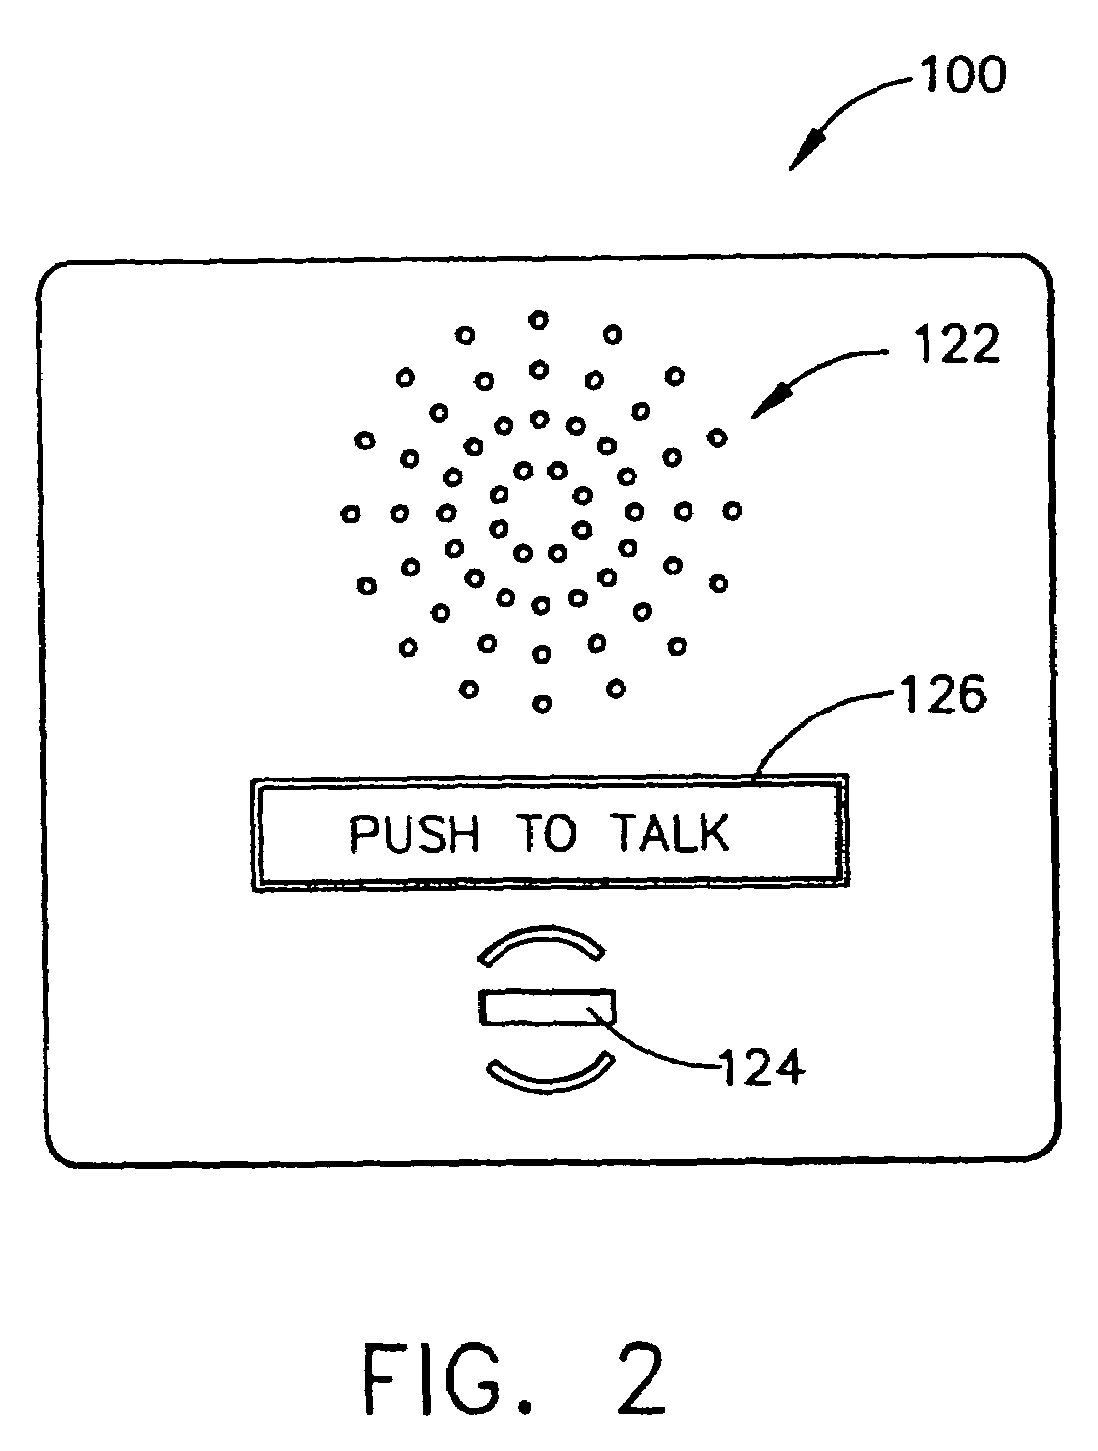 Medical communication and locator system and method